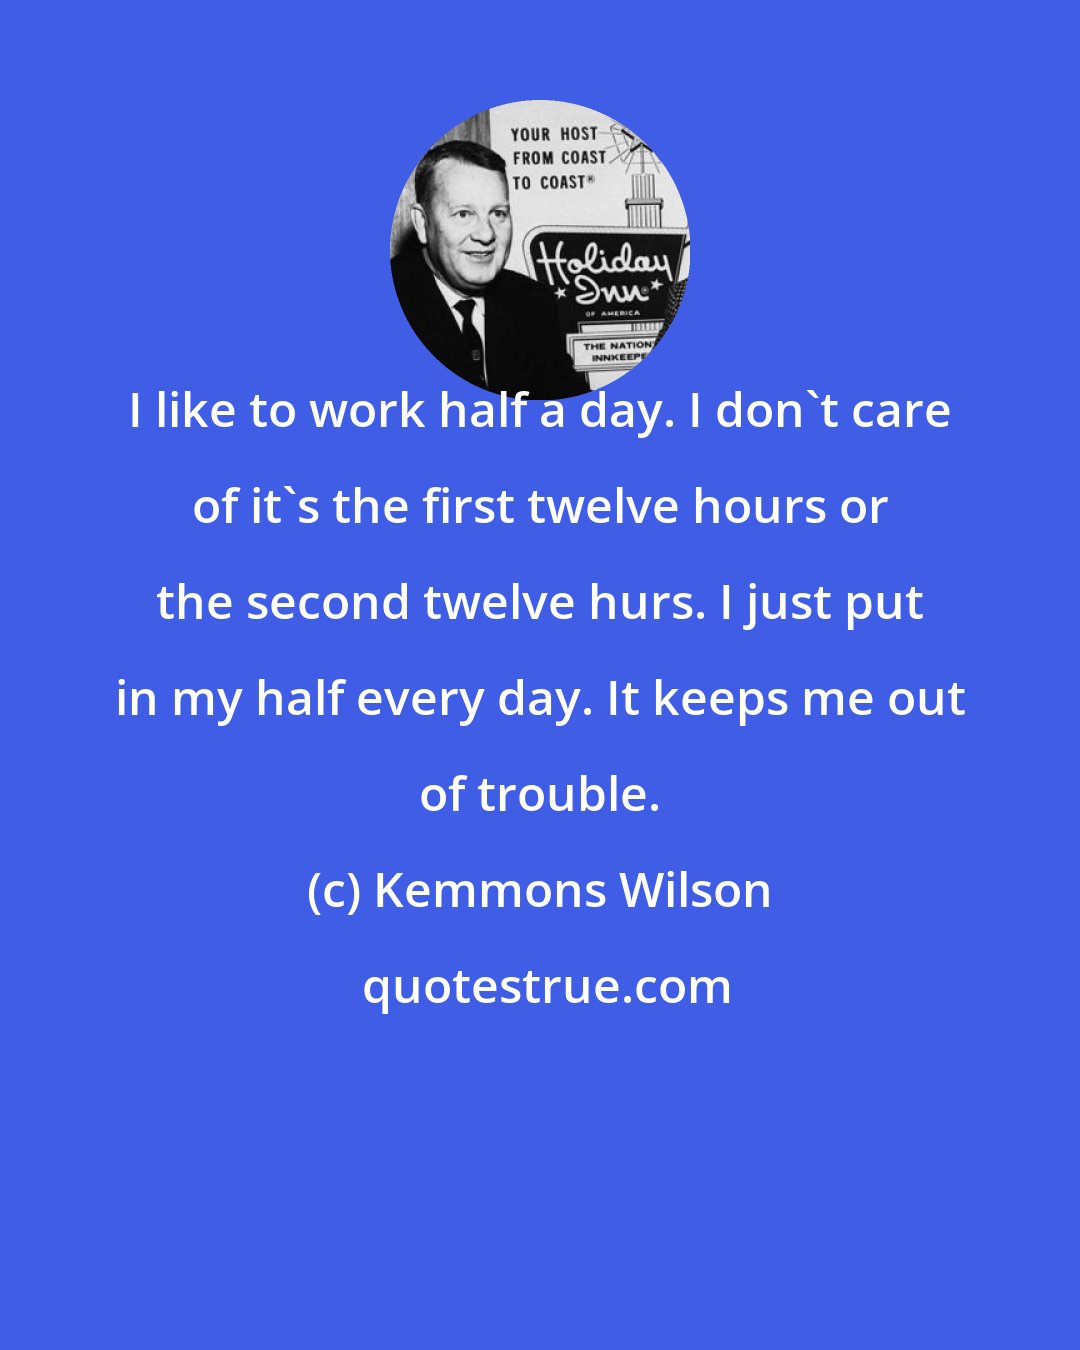 Kemmons Wilson: I like to work half a day. I don't care of it's the first twelve hours or the second twelve hurs. I just put in my half every day. It keeps me out of trouble.